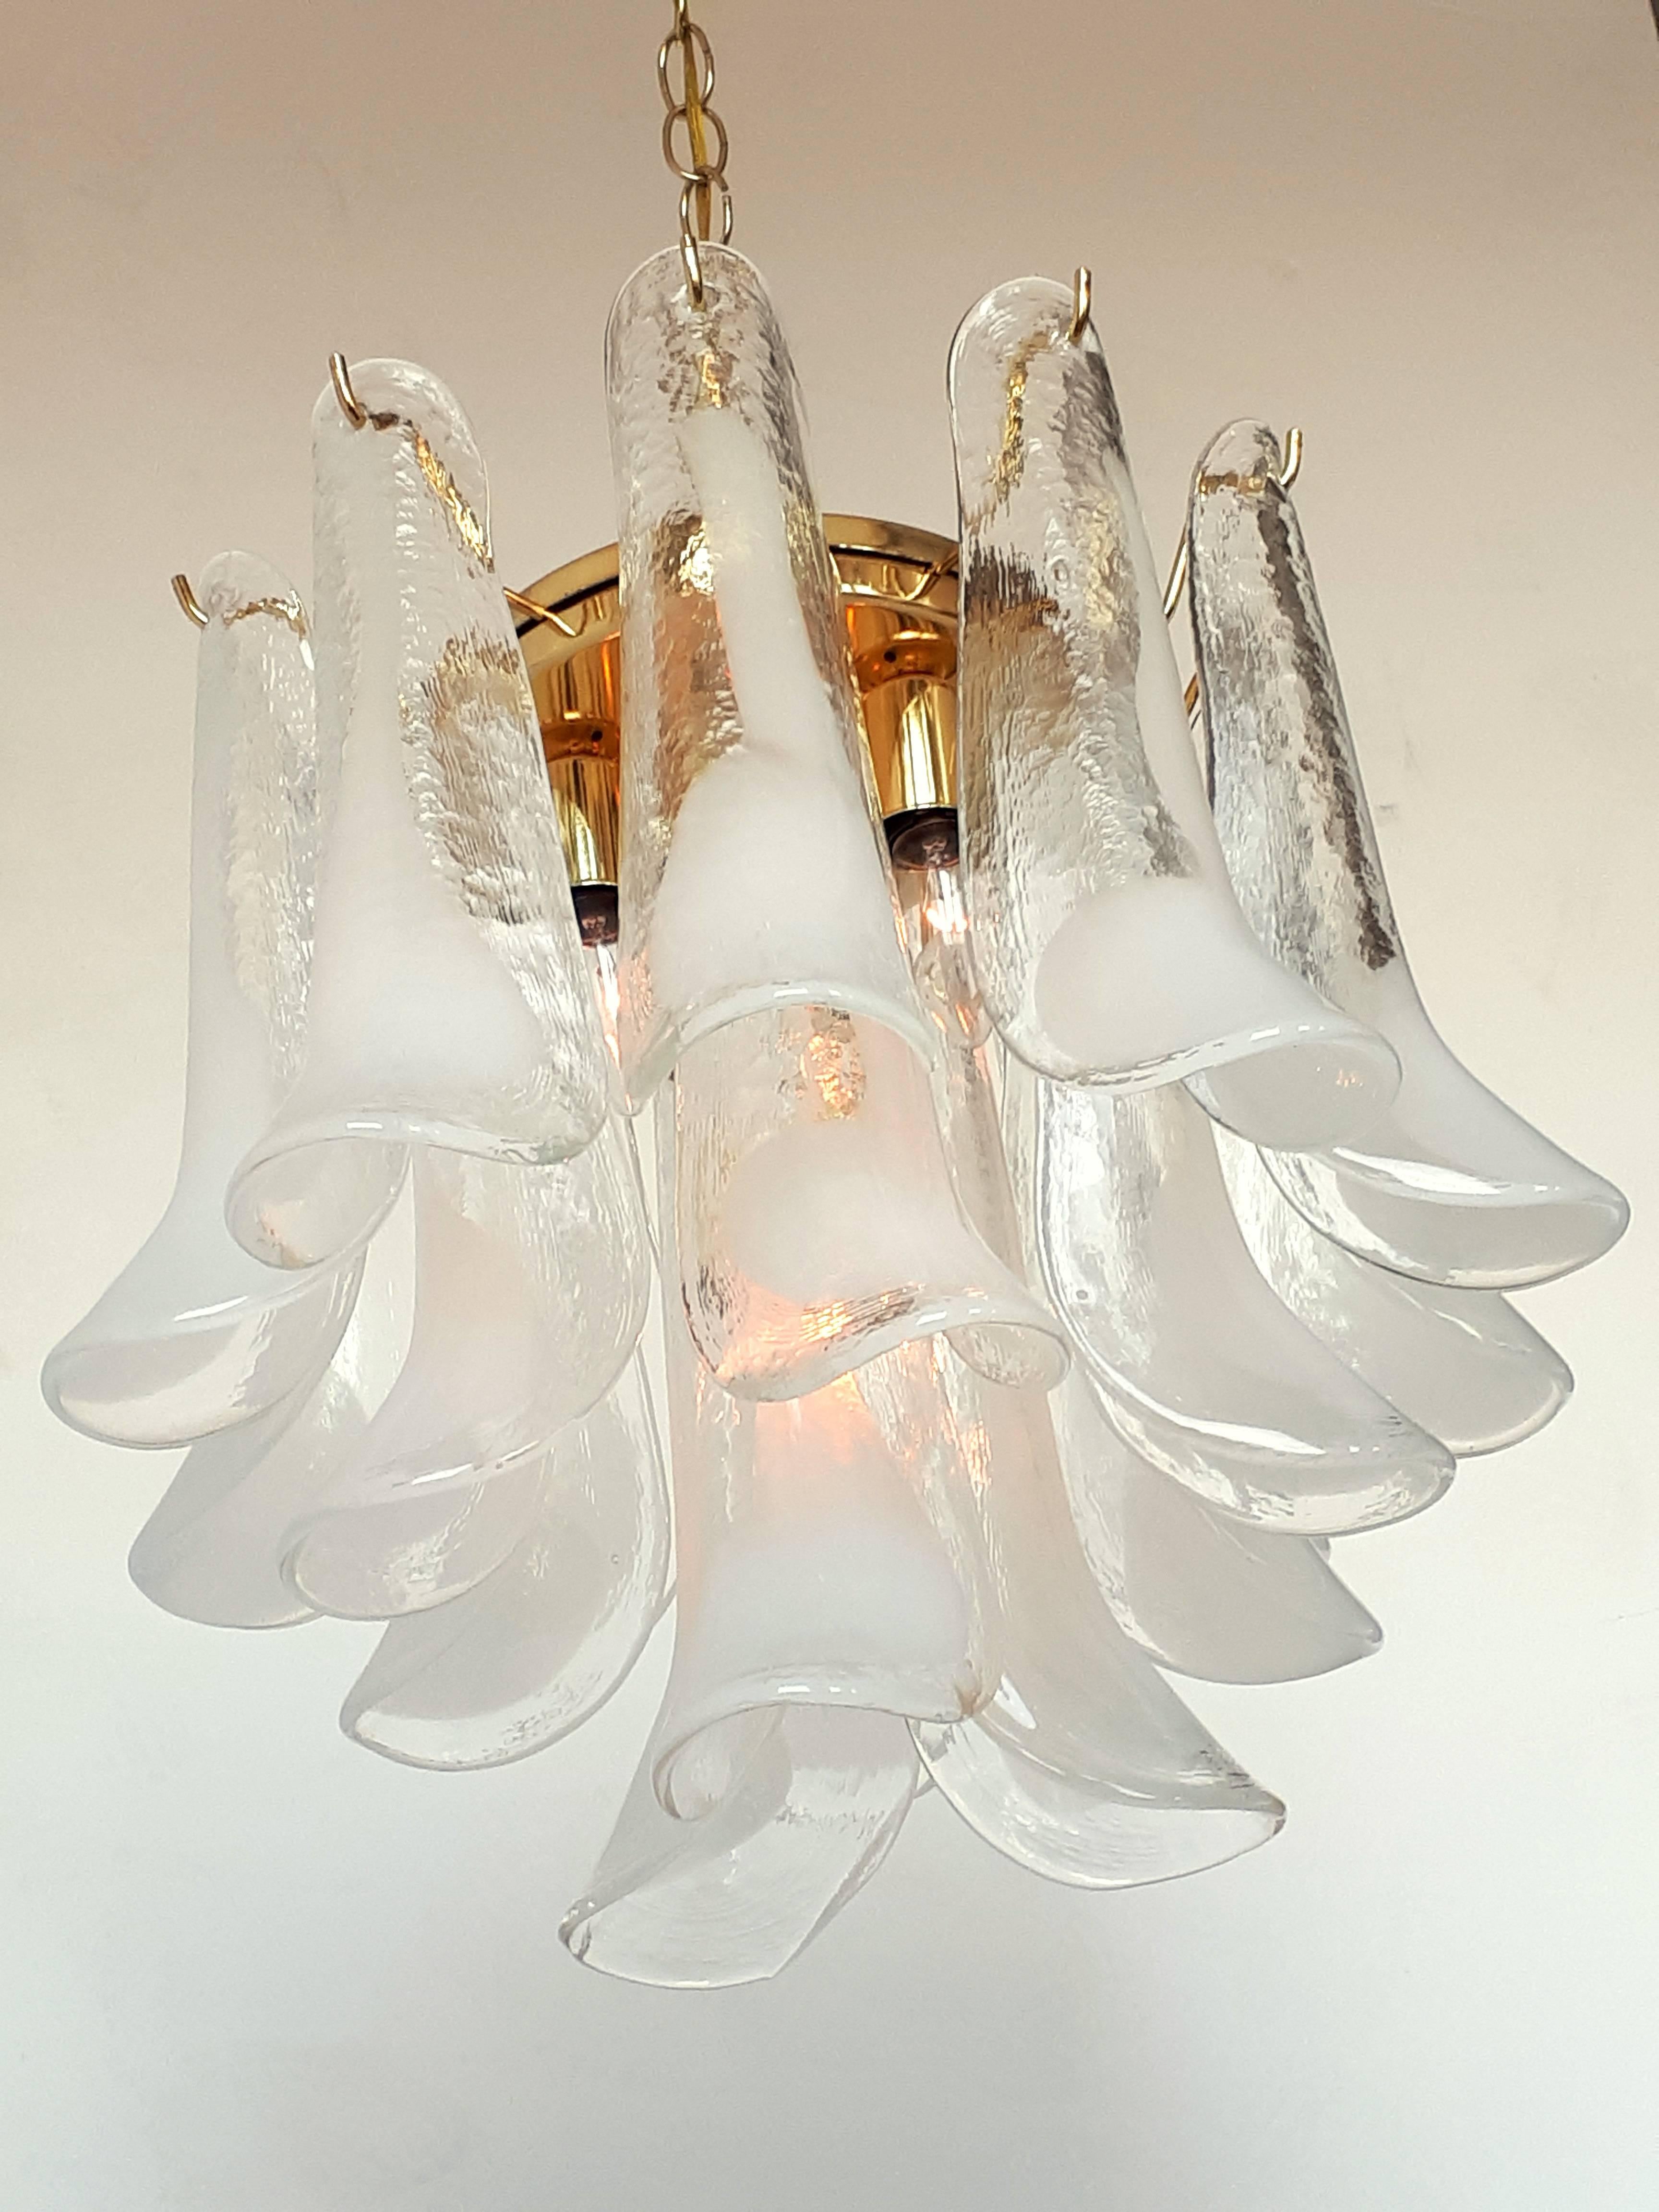 Mouth blowed thick texturized sculptural clear glass petal with milky white streak.

Brass-plated frame. 

Contain four regular E26 socket rated at 60 watts max each. 

Fixture measure 21 in high by 18 in wide. 

Chain length is 41 in. Could